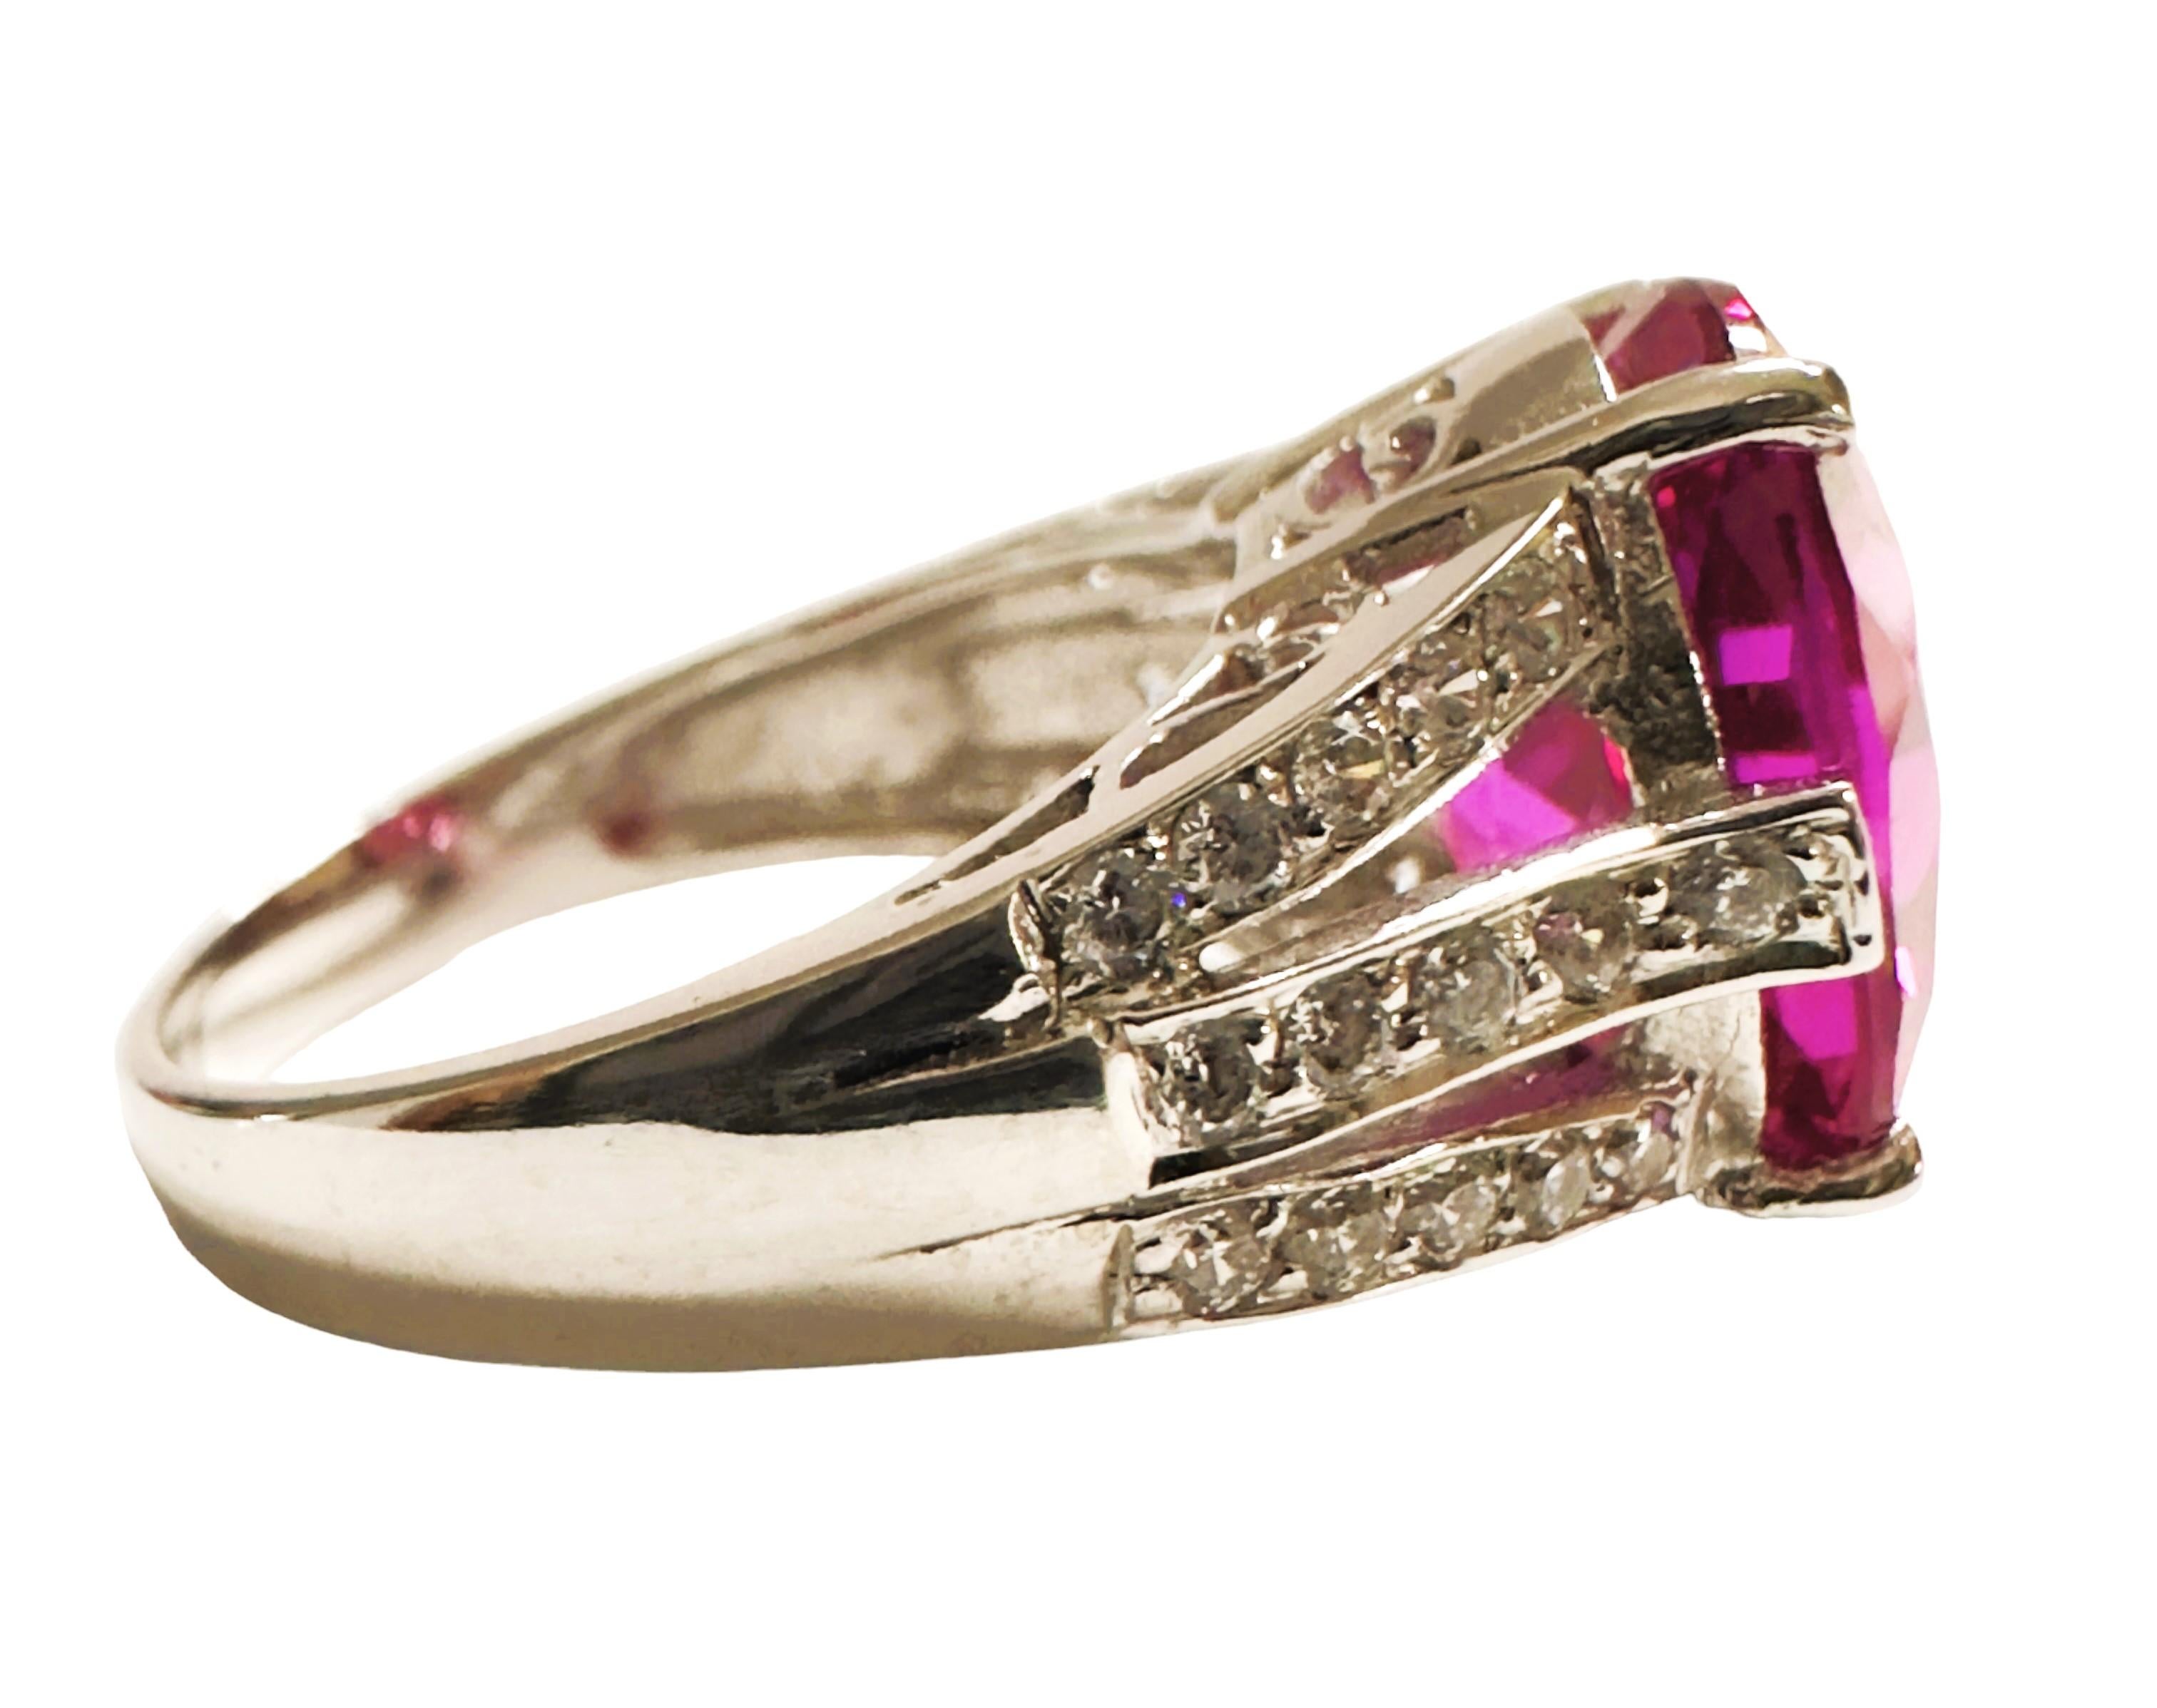 New African 8.0 Ct Pink Sapphire Sterling Ring Size 6 In New Condition For Sale In Eagan, MN